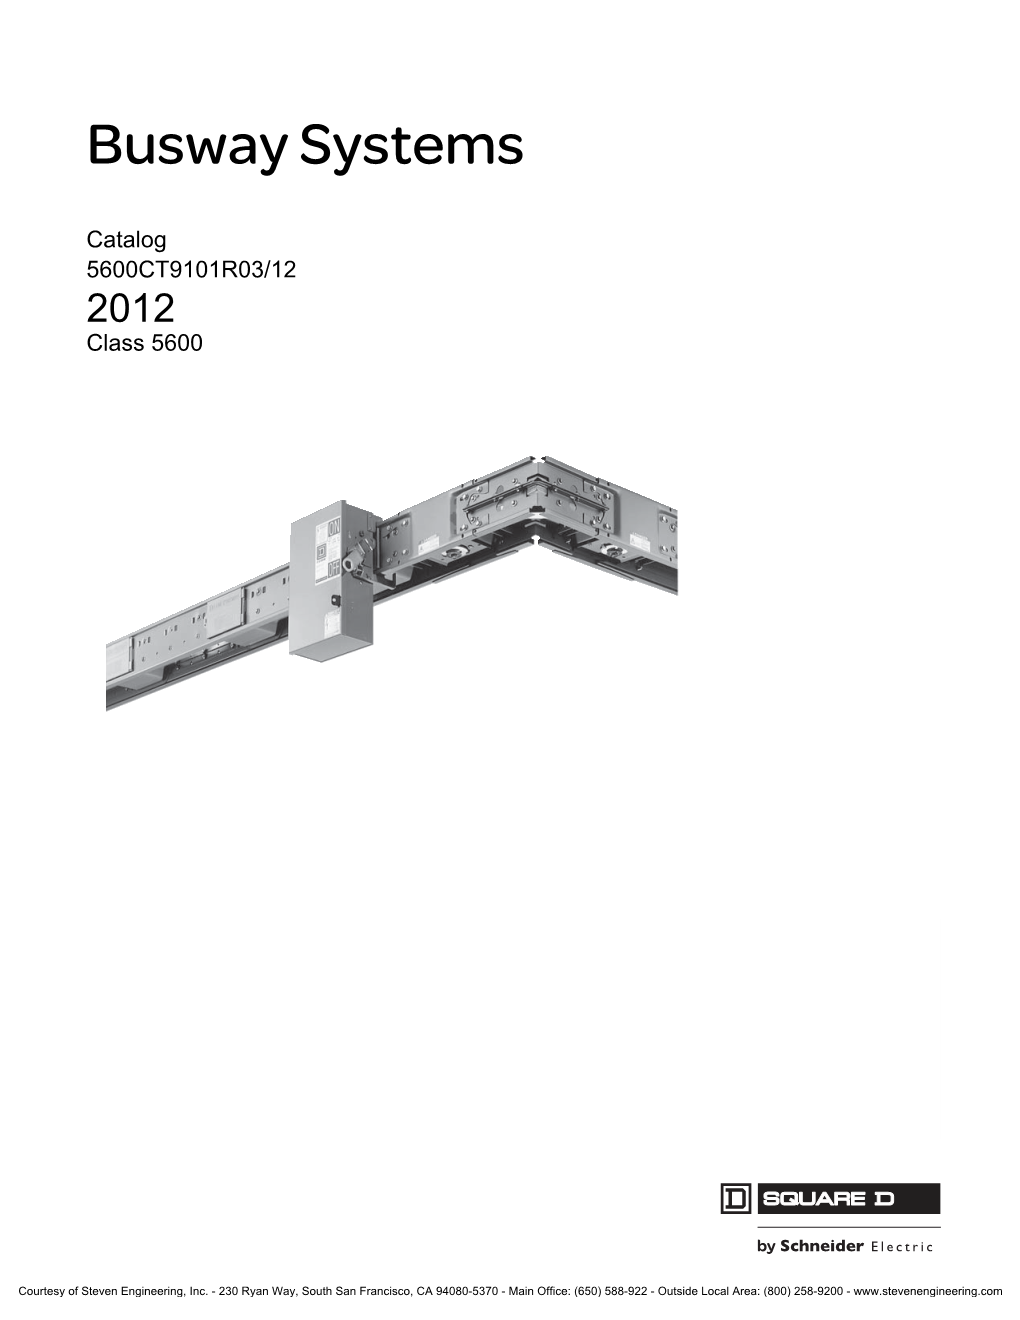 Busway Systems